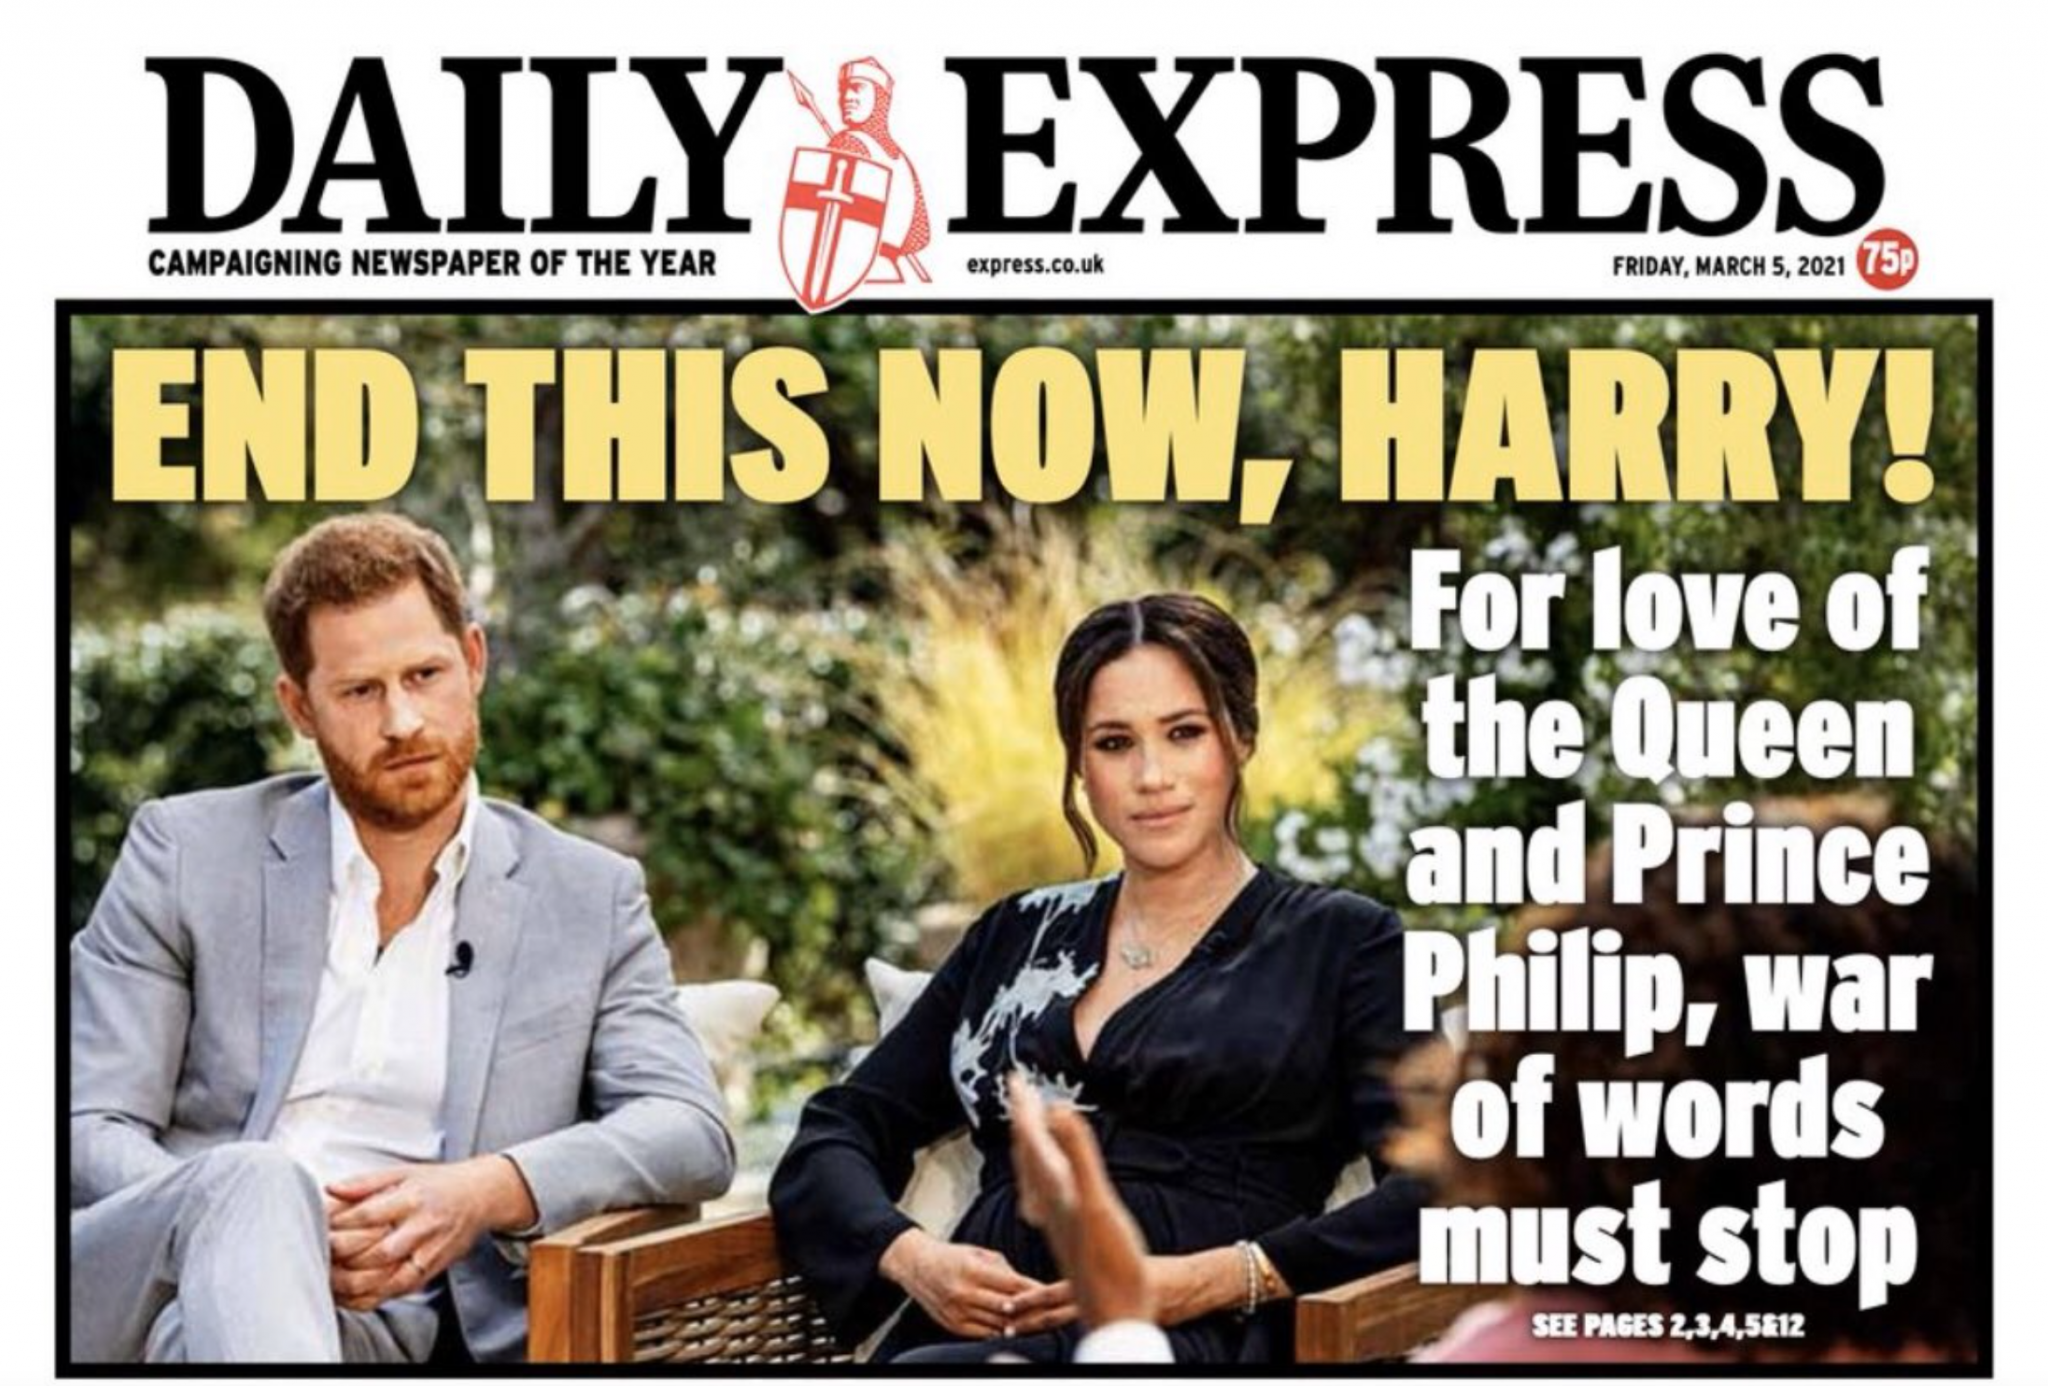 Daily Express front page reading: "End this now, Harry! For the love of the Queen and Prince Philip, the war of words must stop"